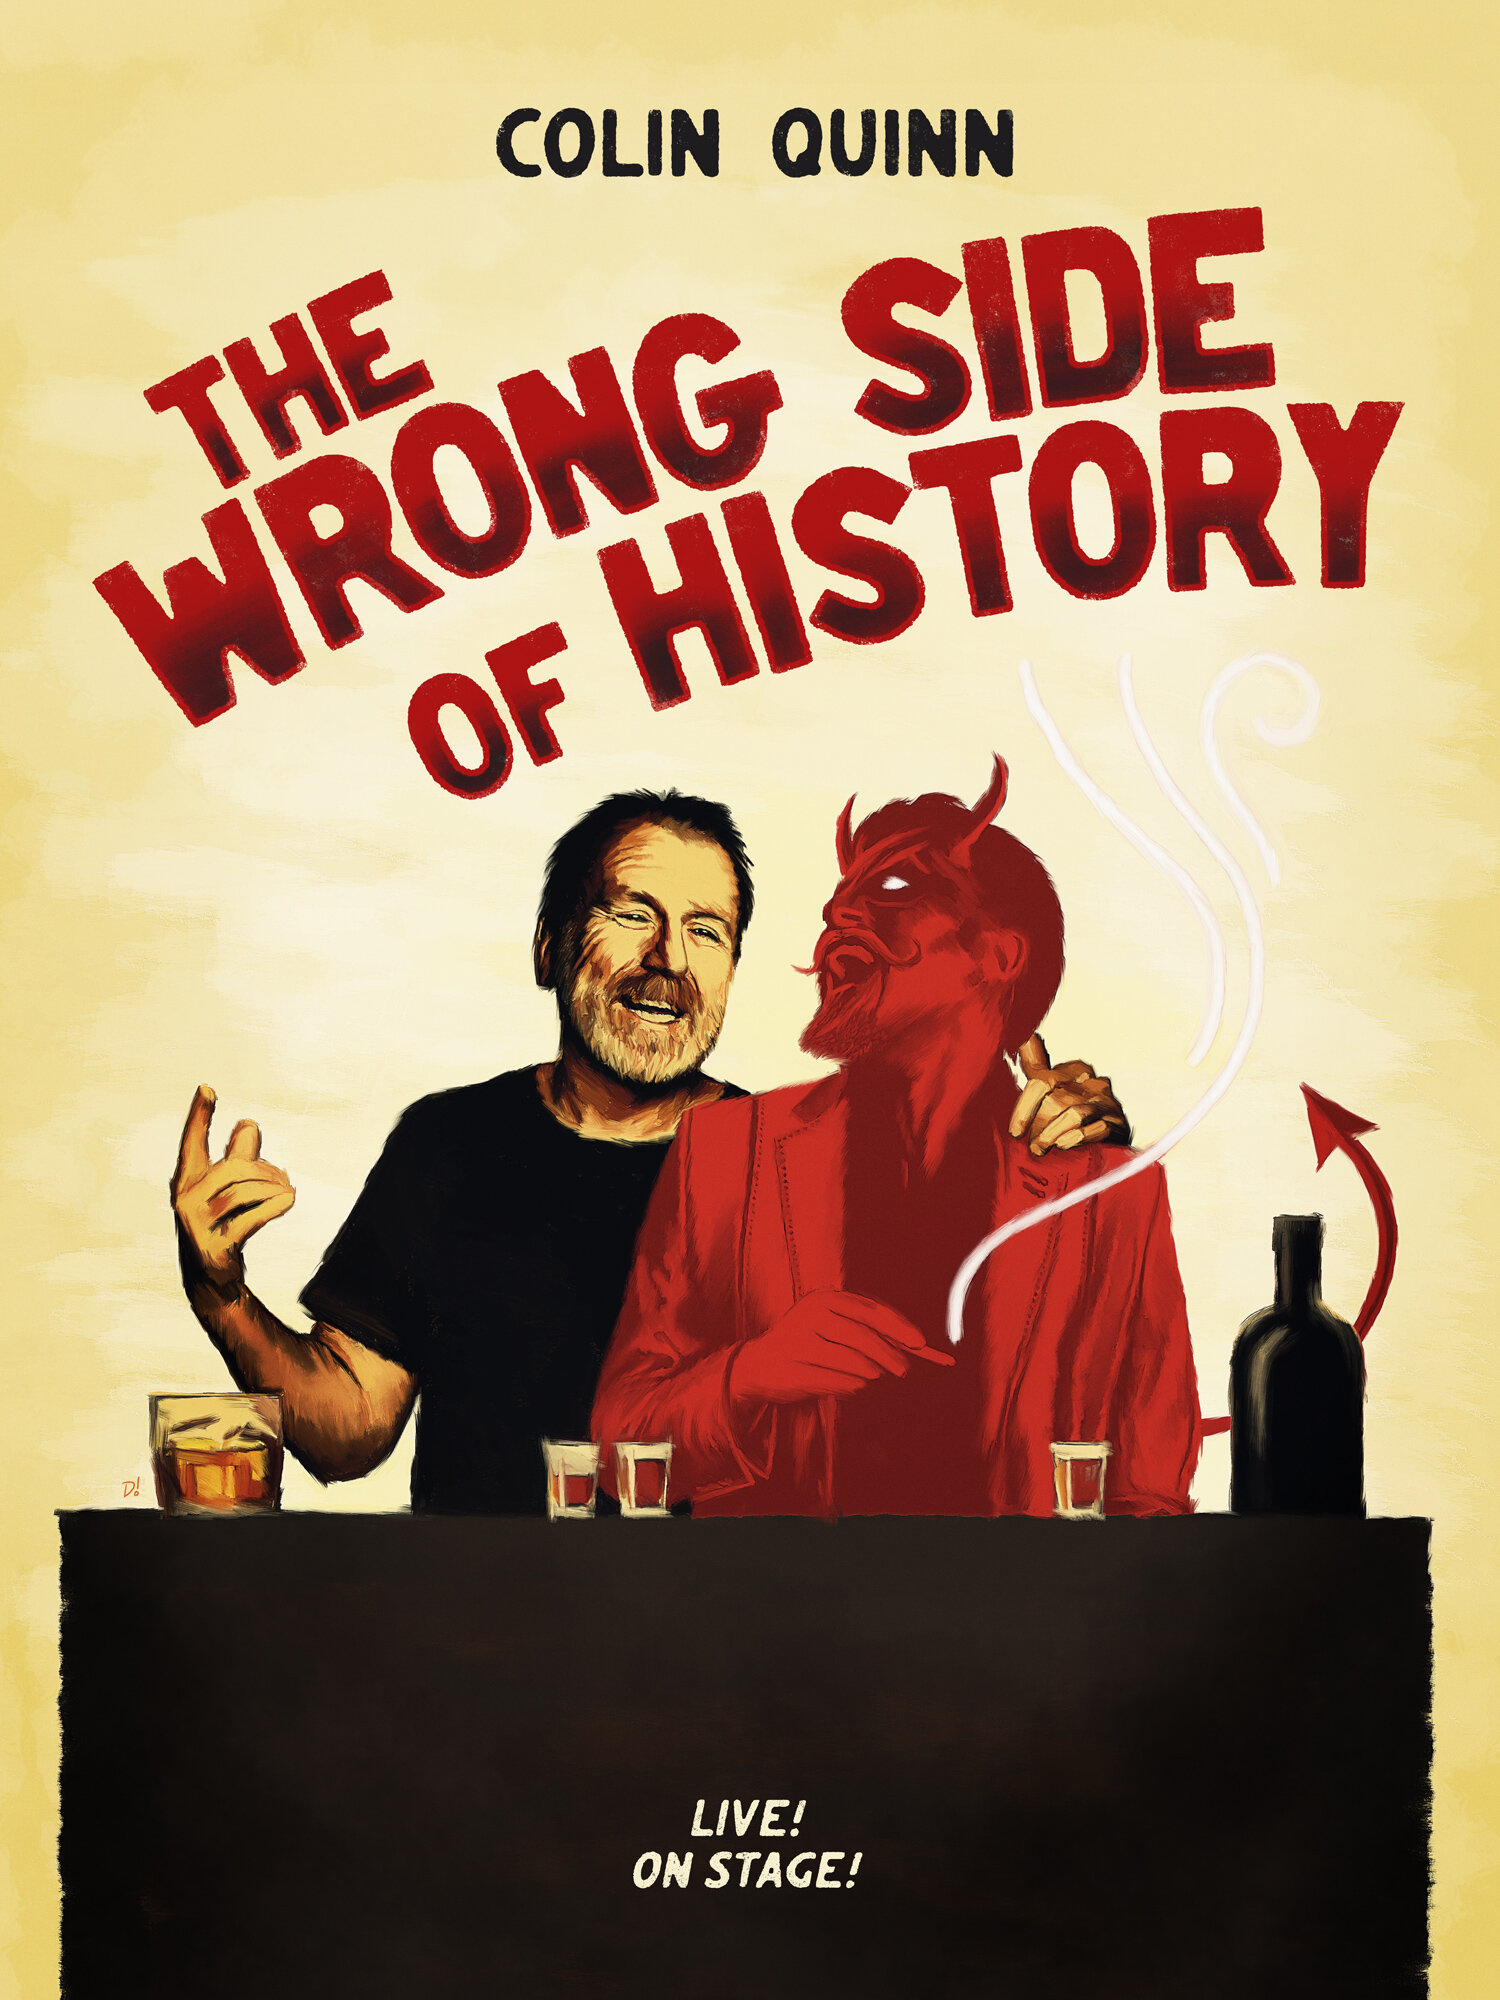 Colin Quinn: The Wrong Side of History